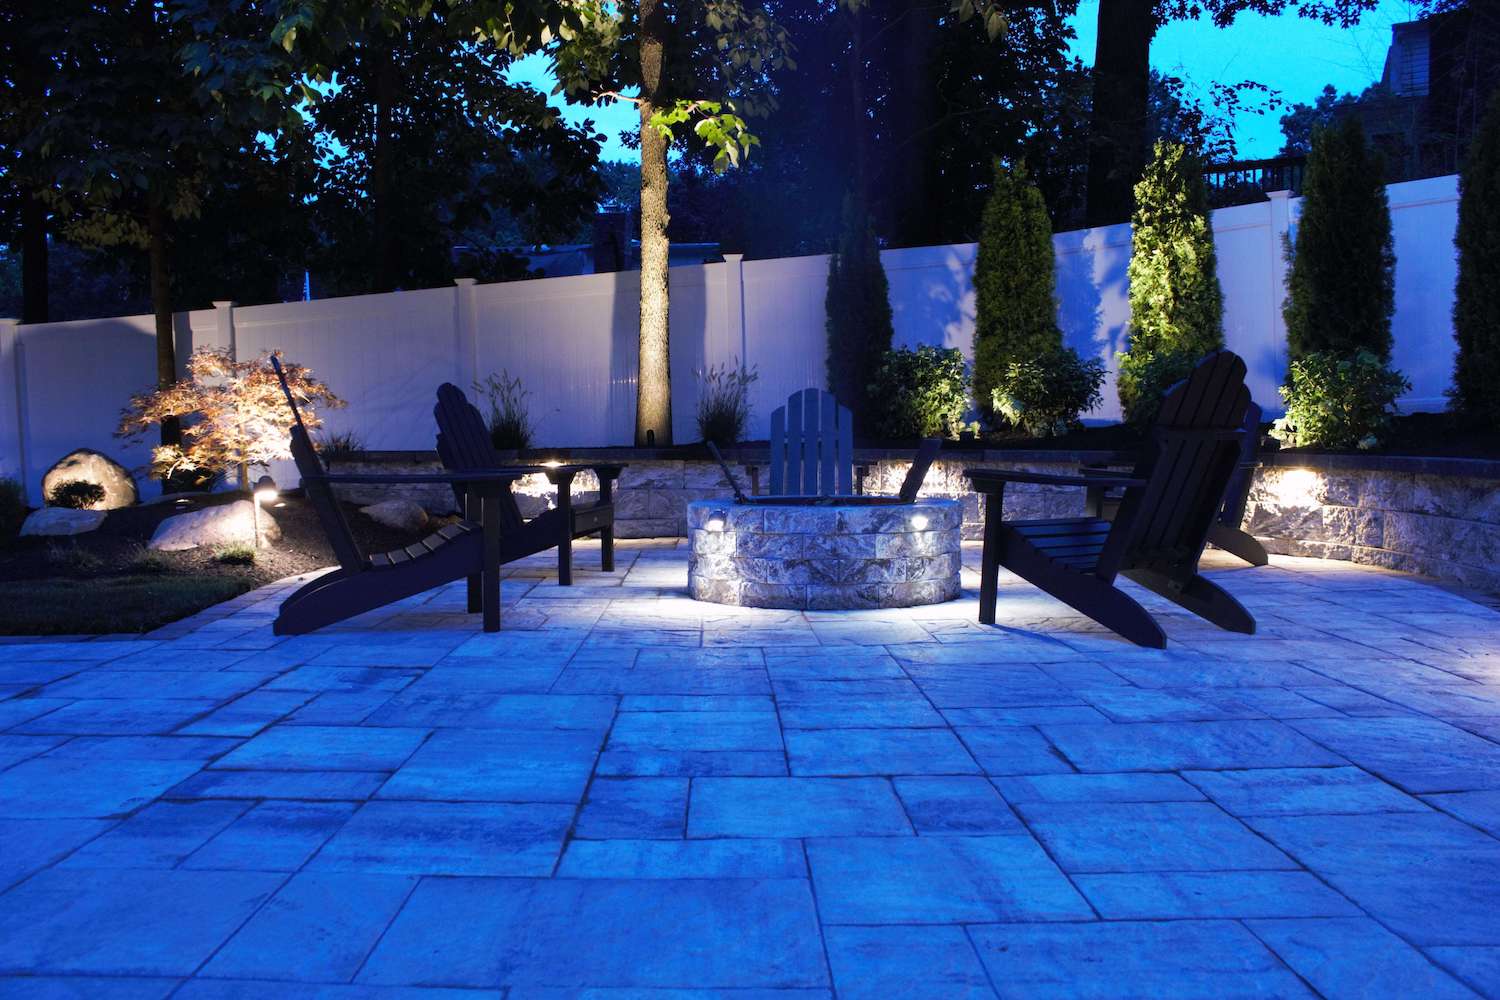 Visions Outdoor Lighting Lights and Landscapes Landscaping New Jersey 8